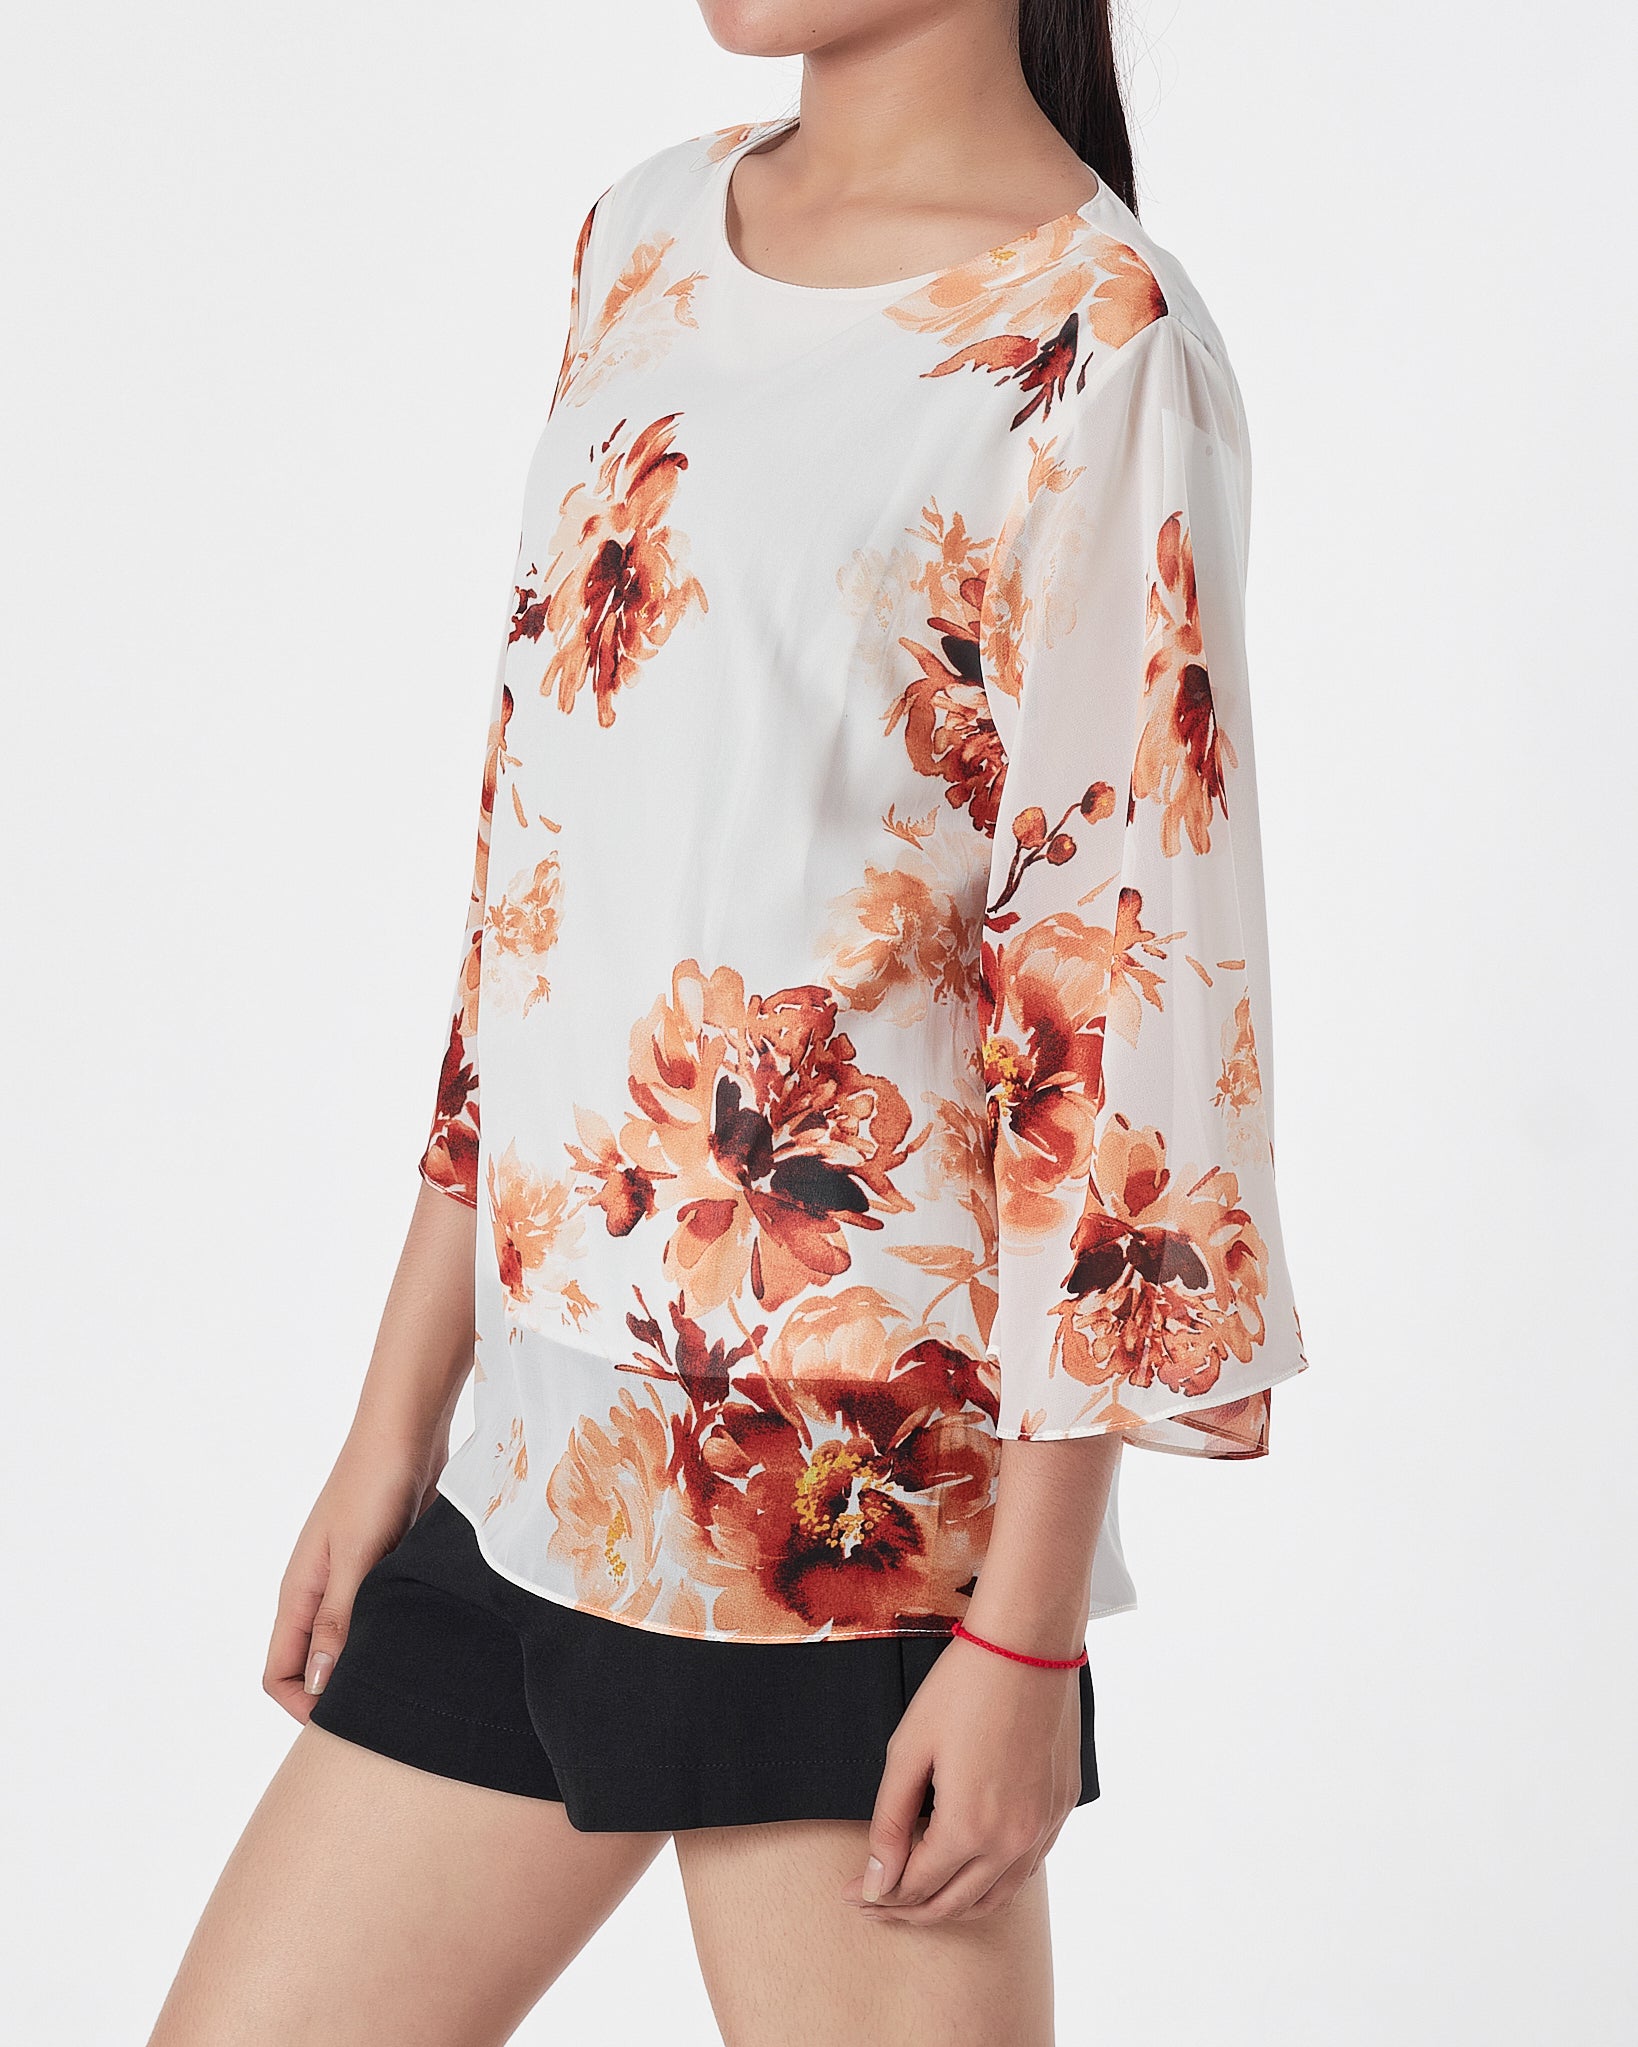 Floral Over Printed Lady  Shirts Long Sleeve 13.90